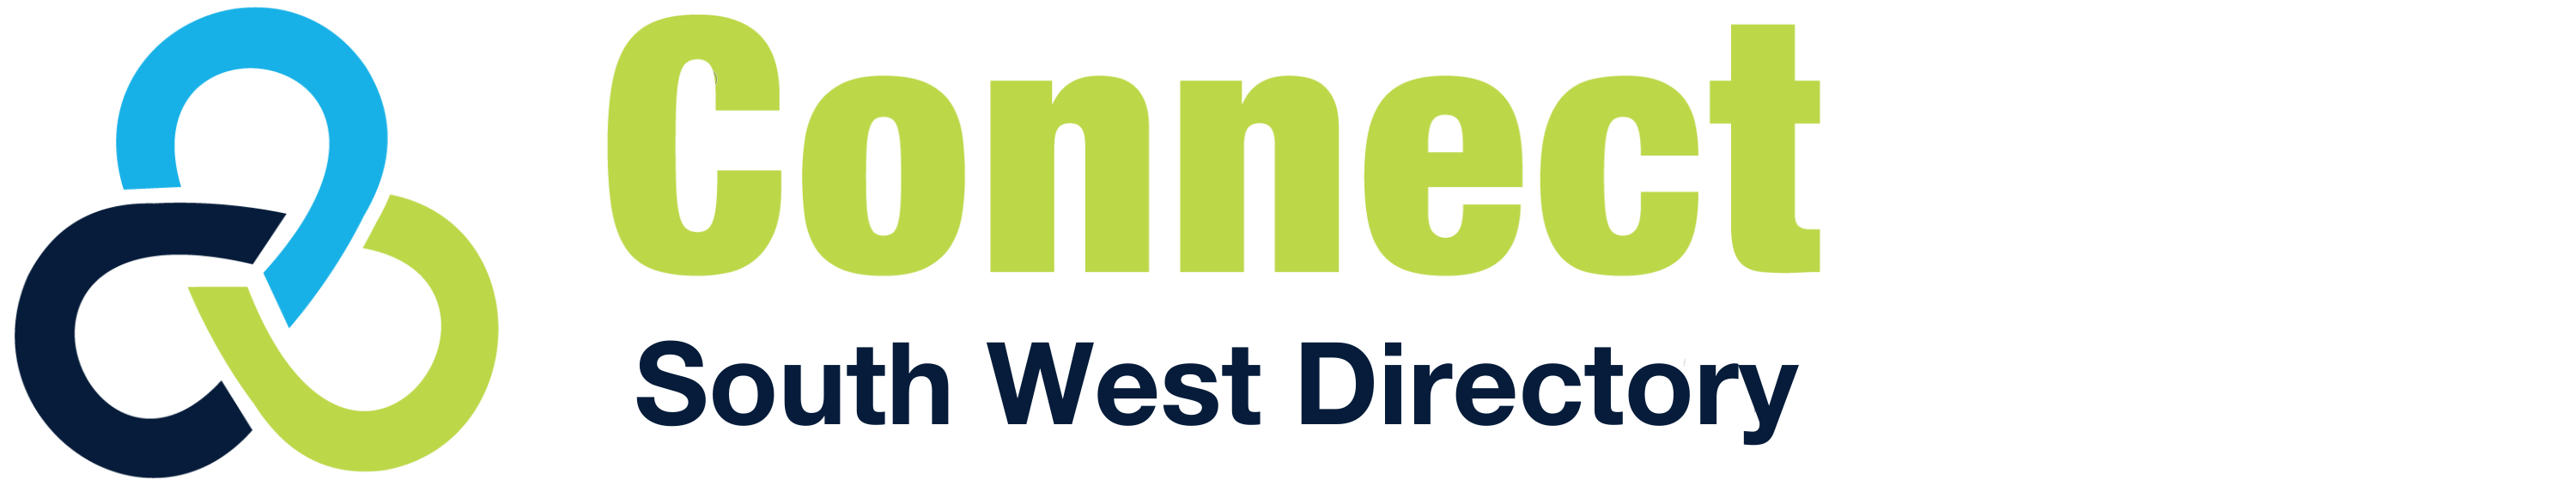 South West Directory